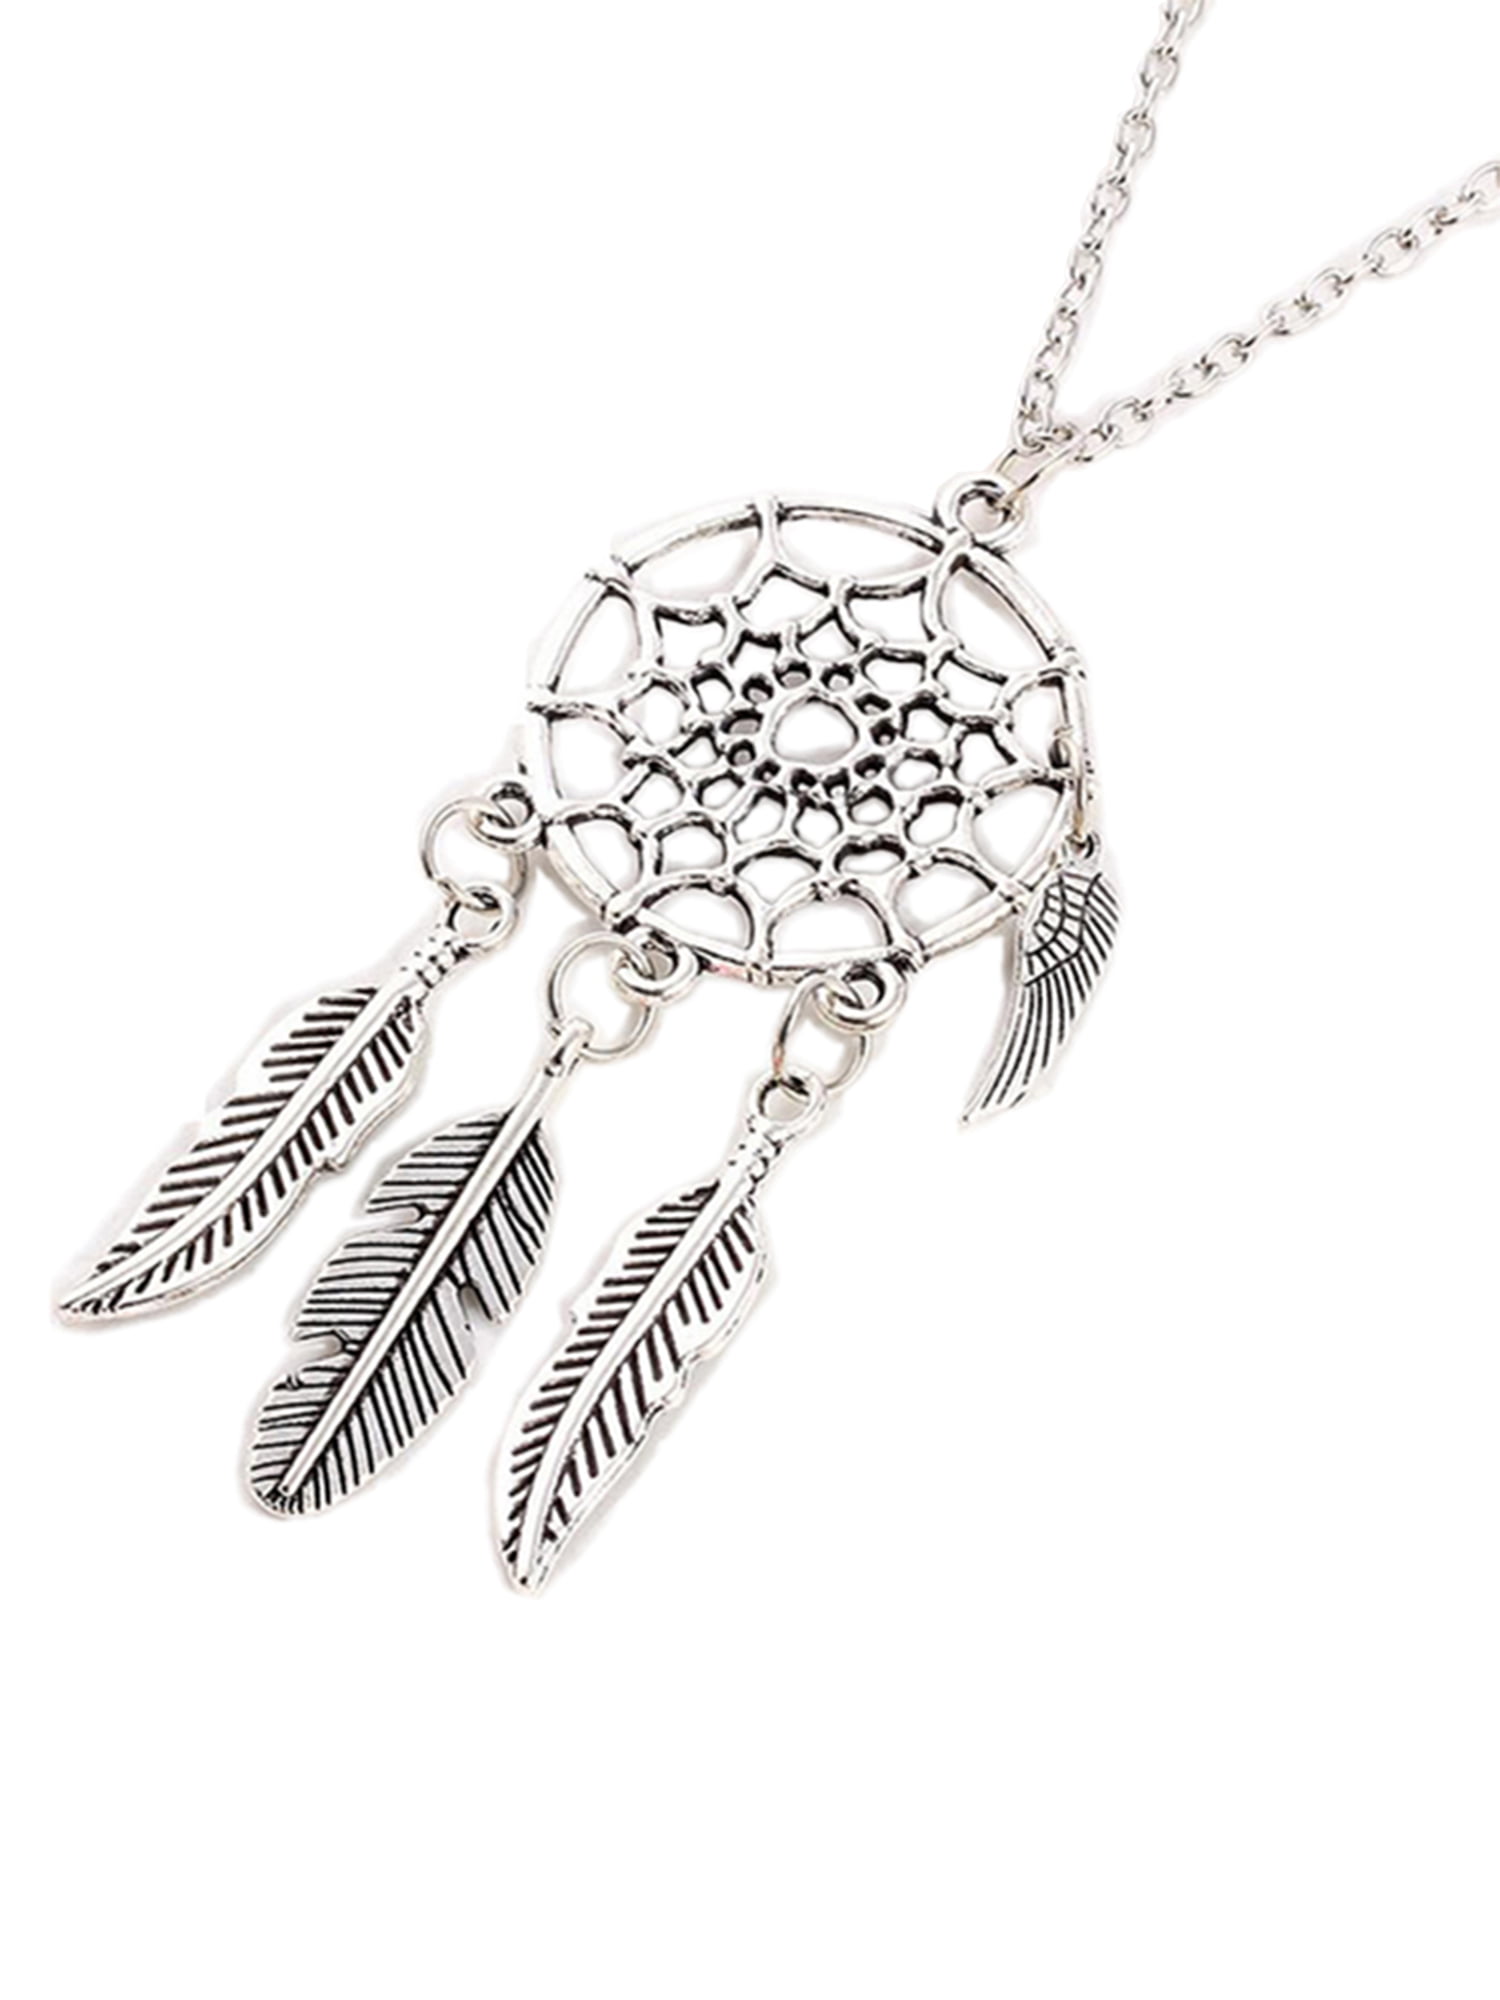 925 Sterling Silver 2.5" Dream Catcher Vintage Style Women Fashion Necklace 